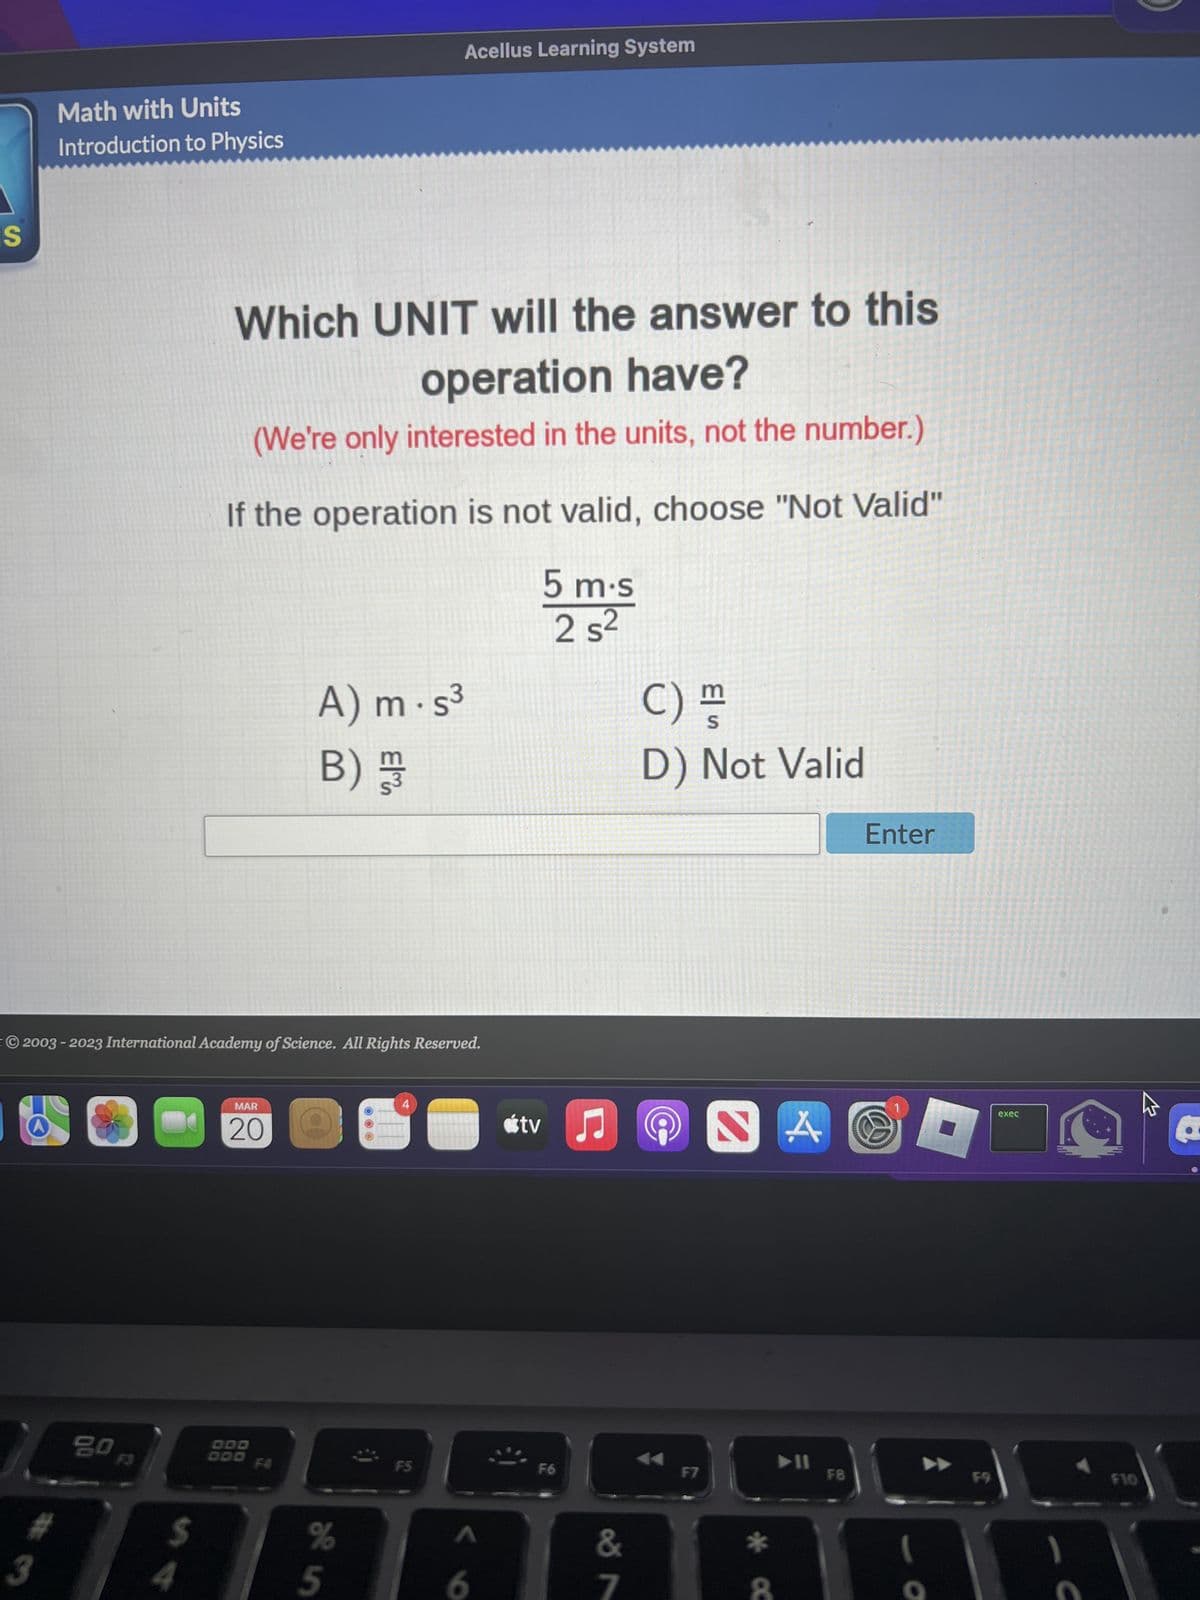 S
Math with Units
Introduction to Physics
#
3
20
54
Which UNIT will the answer to this
operation have?
(We're only interested in the units, not the number.)
If the operation is not valid, choose "Not Valid"
5 m.s
2 s²
© 2003-2023 International Academy of Science. All Rights Reserved.
MAR
20
000
A) m.s³
B) /
%
je in
E E
Acellus Learning System
5
F5
6
tv ♫
F6
&
7
C) m
S
D) Not Valid
F7
NA
* C
➤11
F8
Enter
S
F9
exec
C
F10